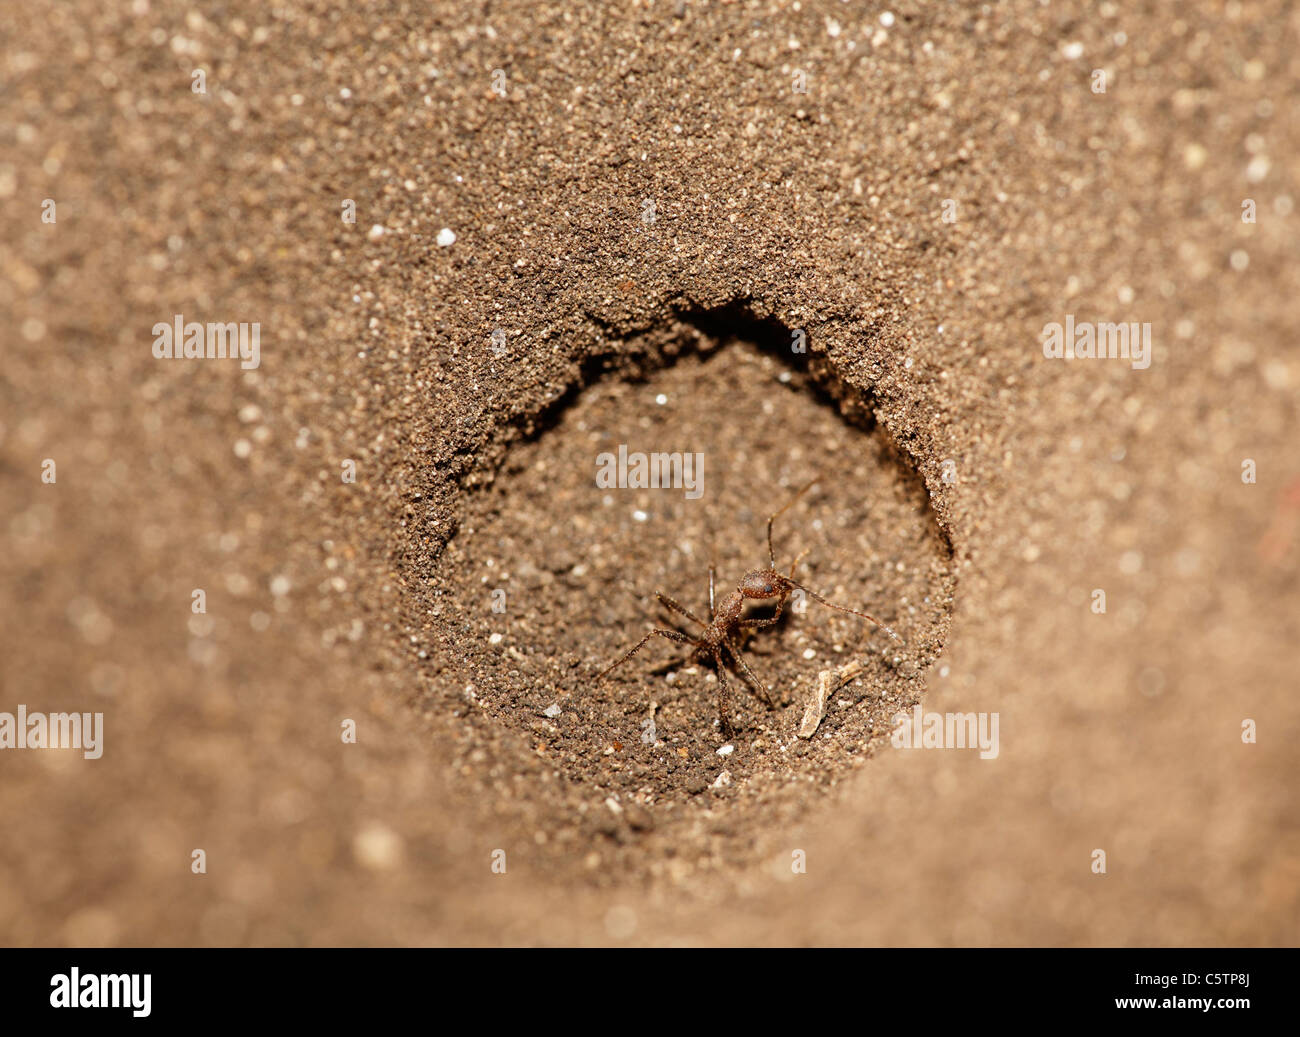 Costa Rica, Guanacaste, Palo Verde, Ant in funnel trap of antlion Stock Photo